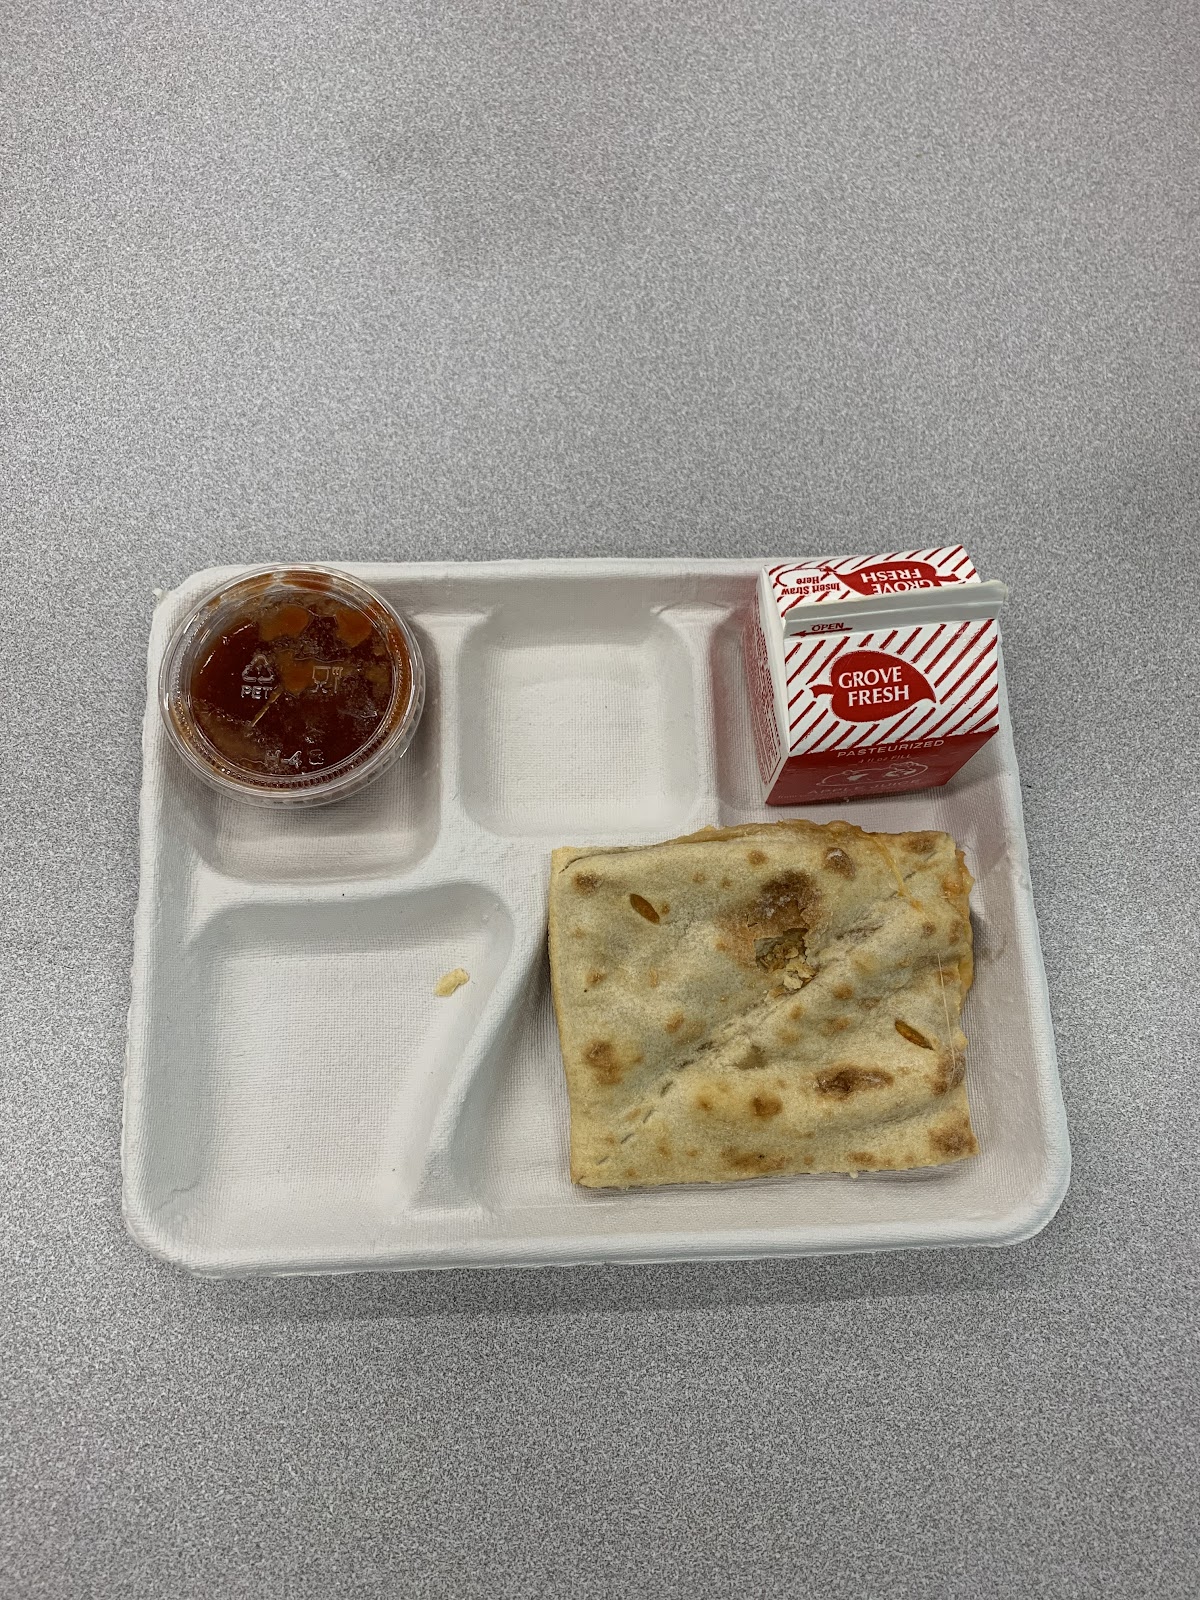 How Do Students Feel About School Lunch?